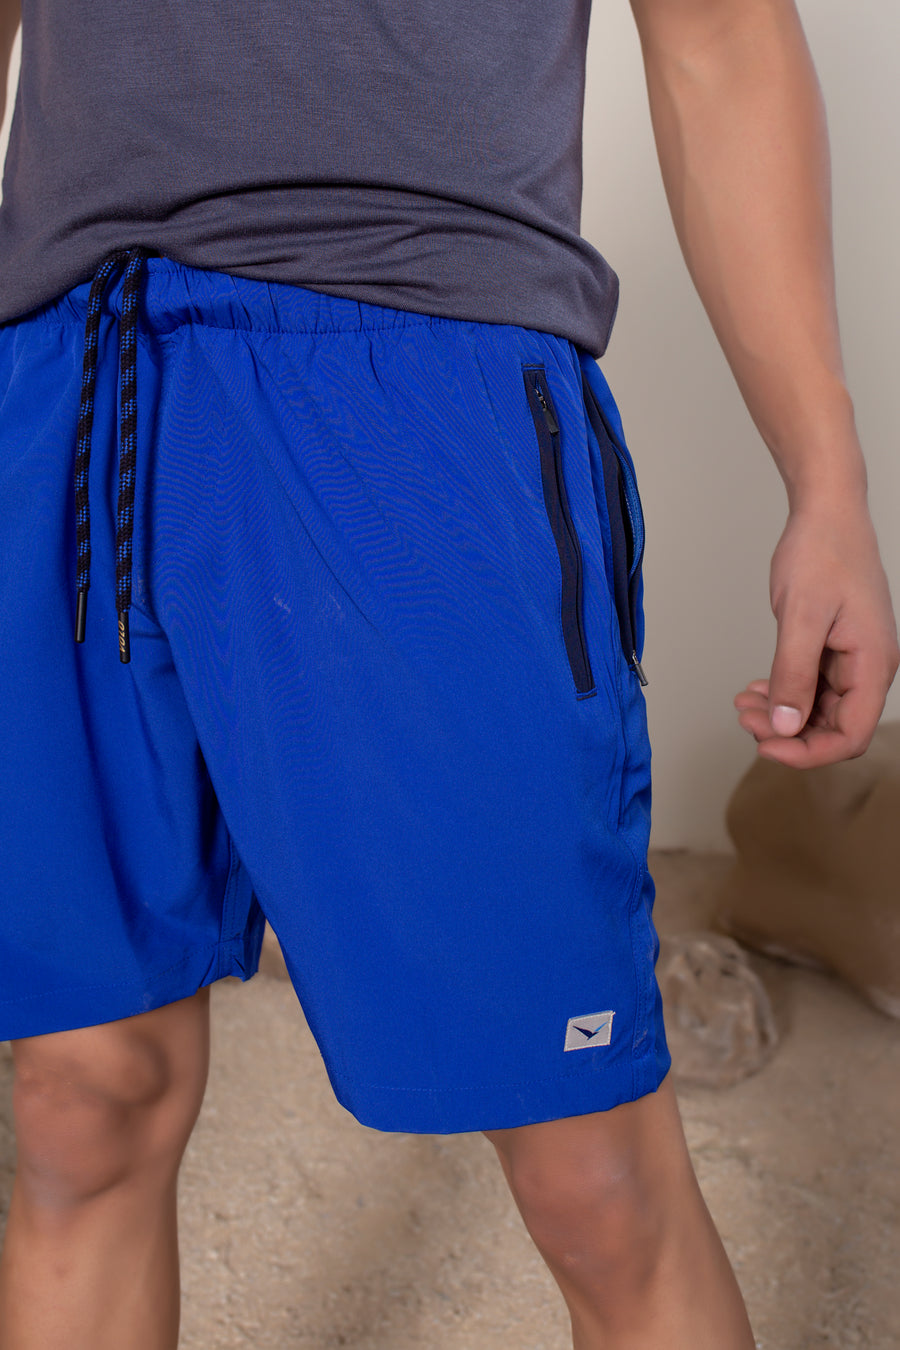 Men's Flight Shorts in Lapis Blue | VOLO Apparel | Designed so you can feel fly and completely secure, the Flight Shorts 2.0 are made with an ultralight micro stretch fabric that is quick drying and comes with a three zipper pocket design. The smart pocket tech makes it so your stuff won’t bounce when you do. Reinforced stitching so it can handle everything you will throw at it. The one short for your every adventure.